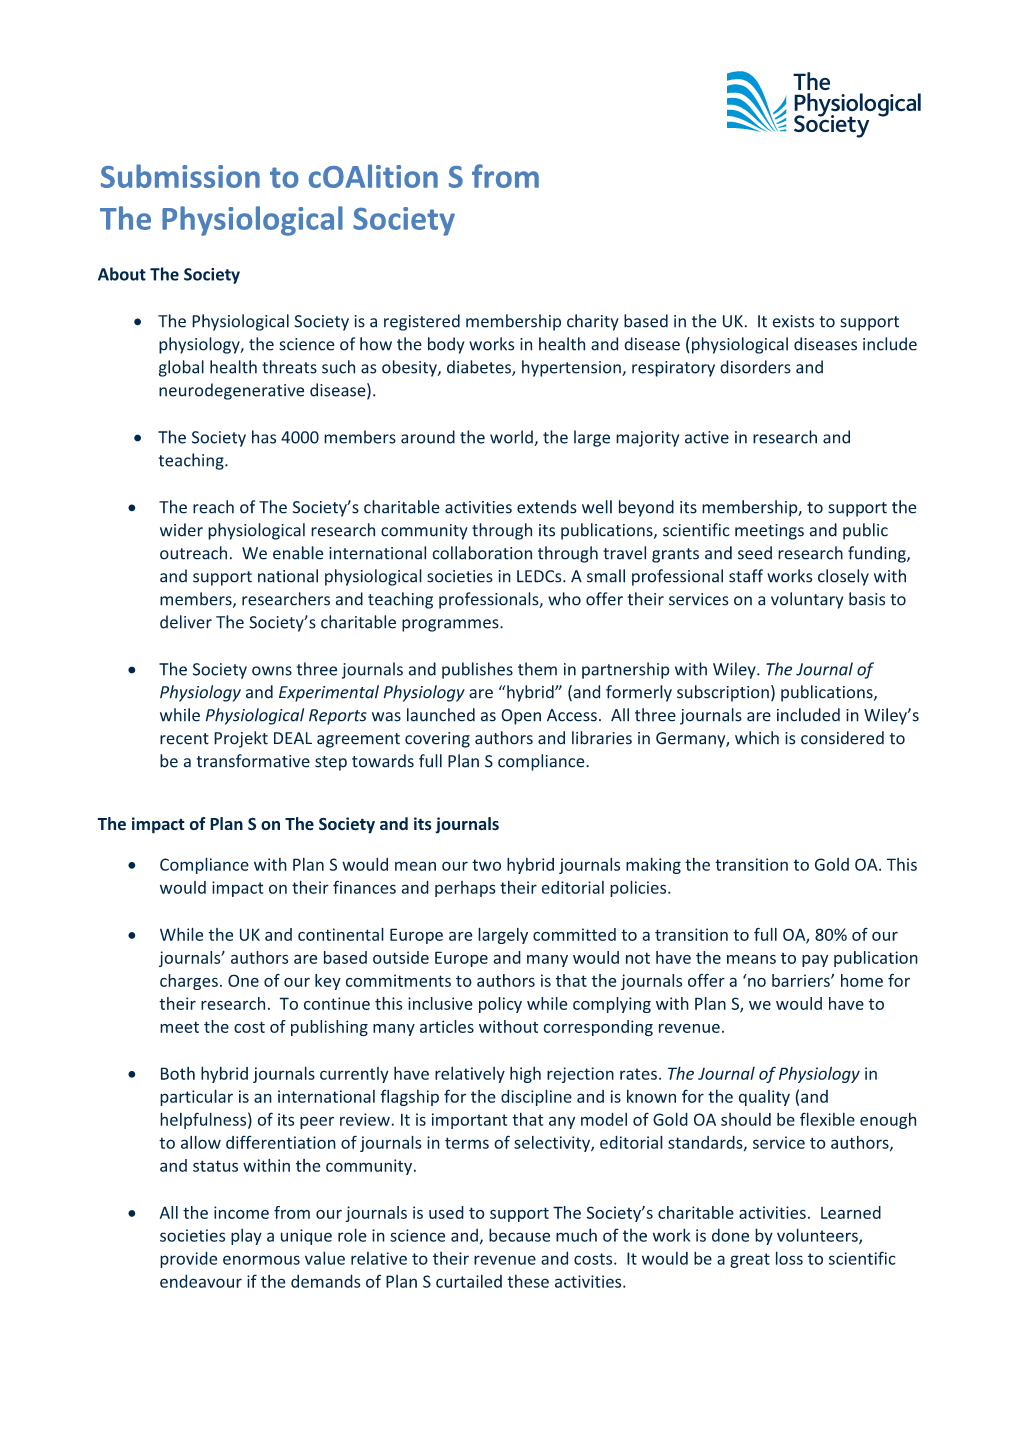 Physiological Society Template